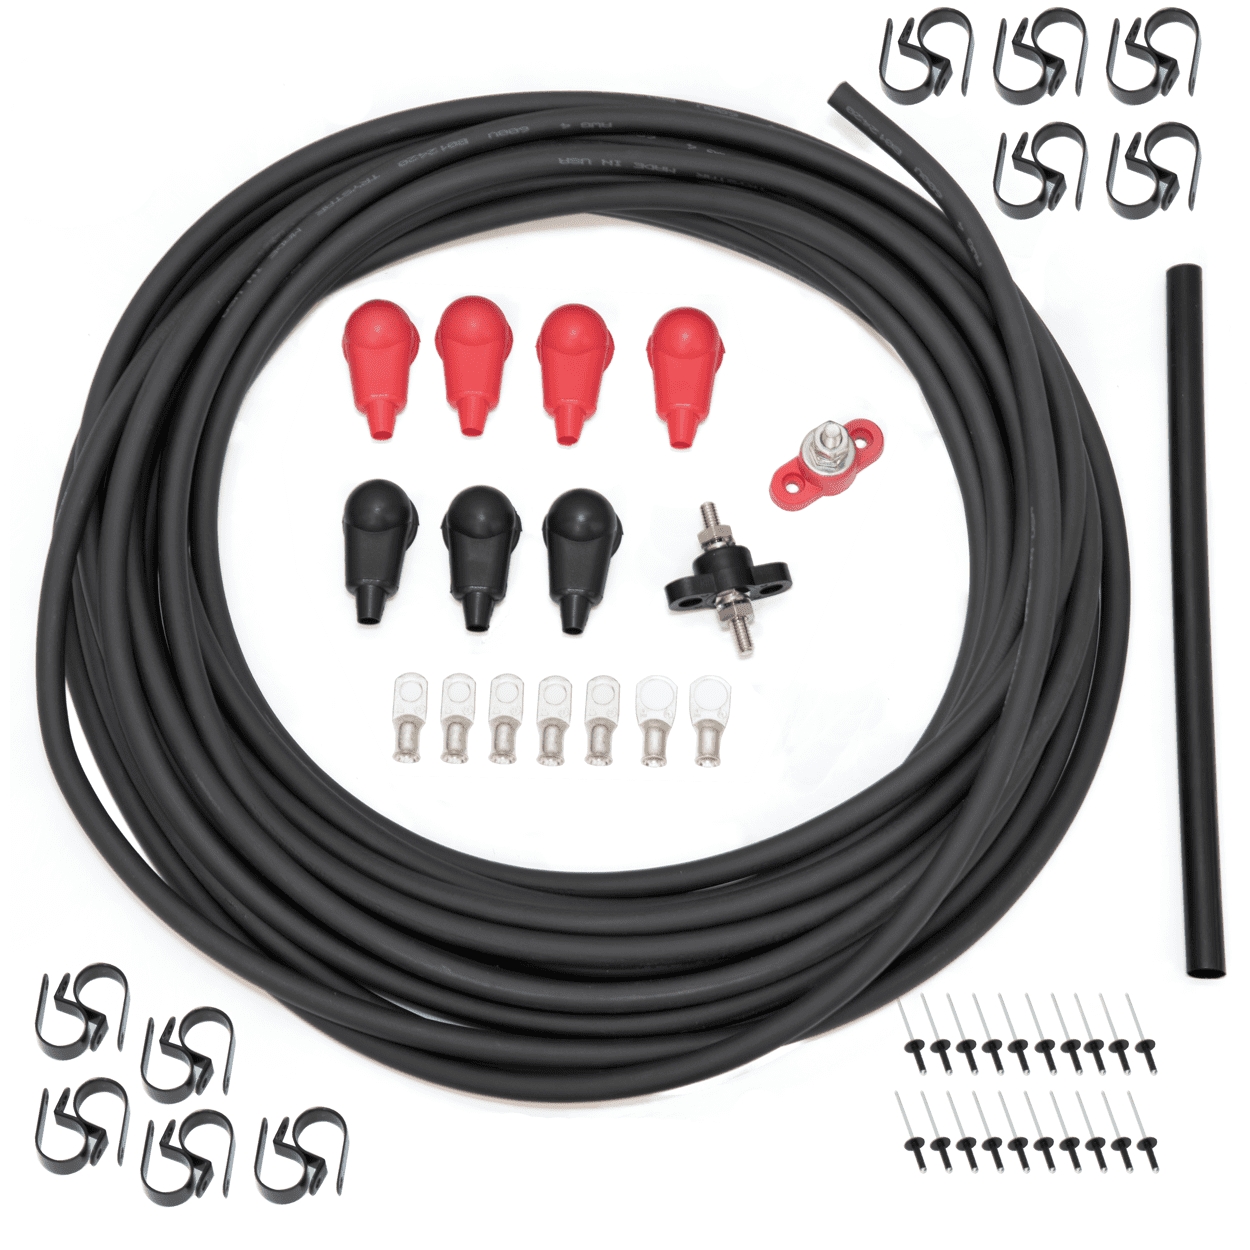 MR Builder Series Pro Battery Cable Kit